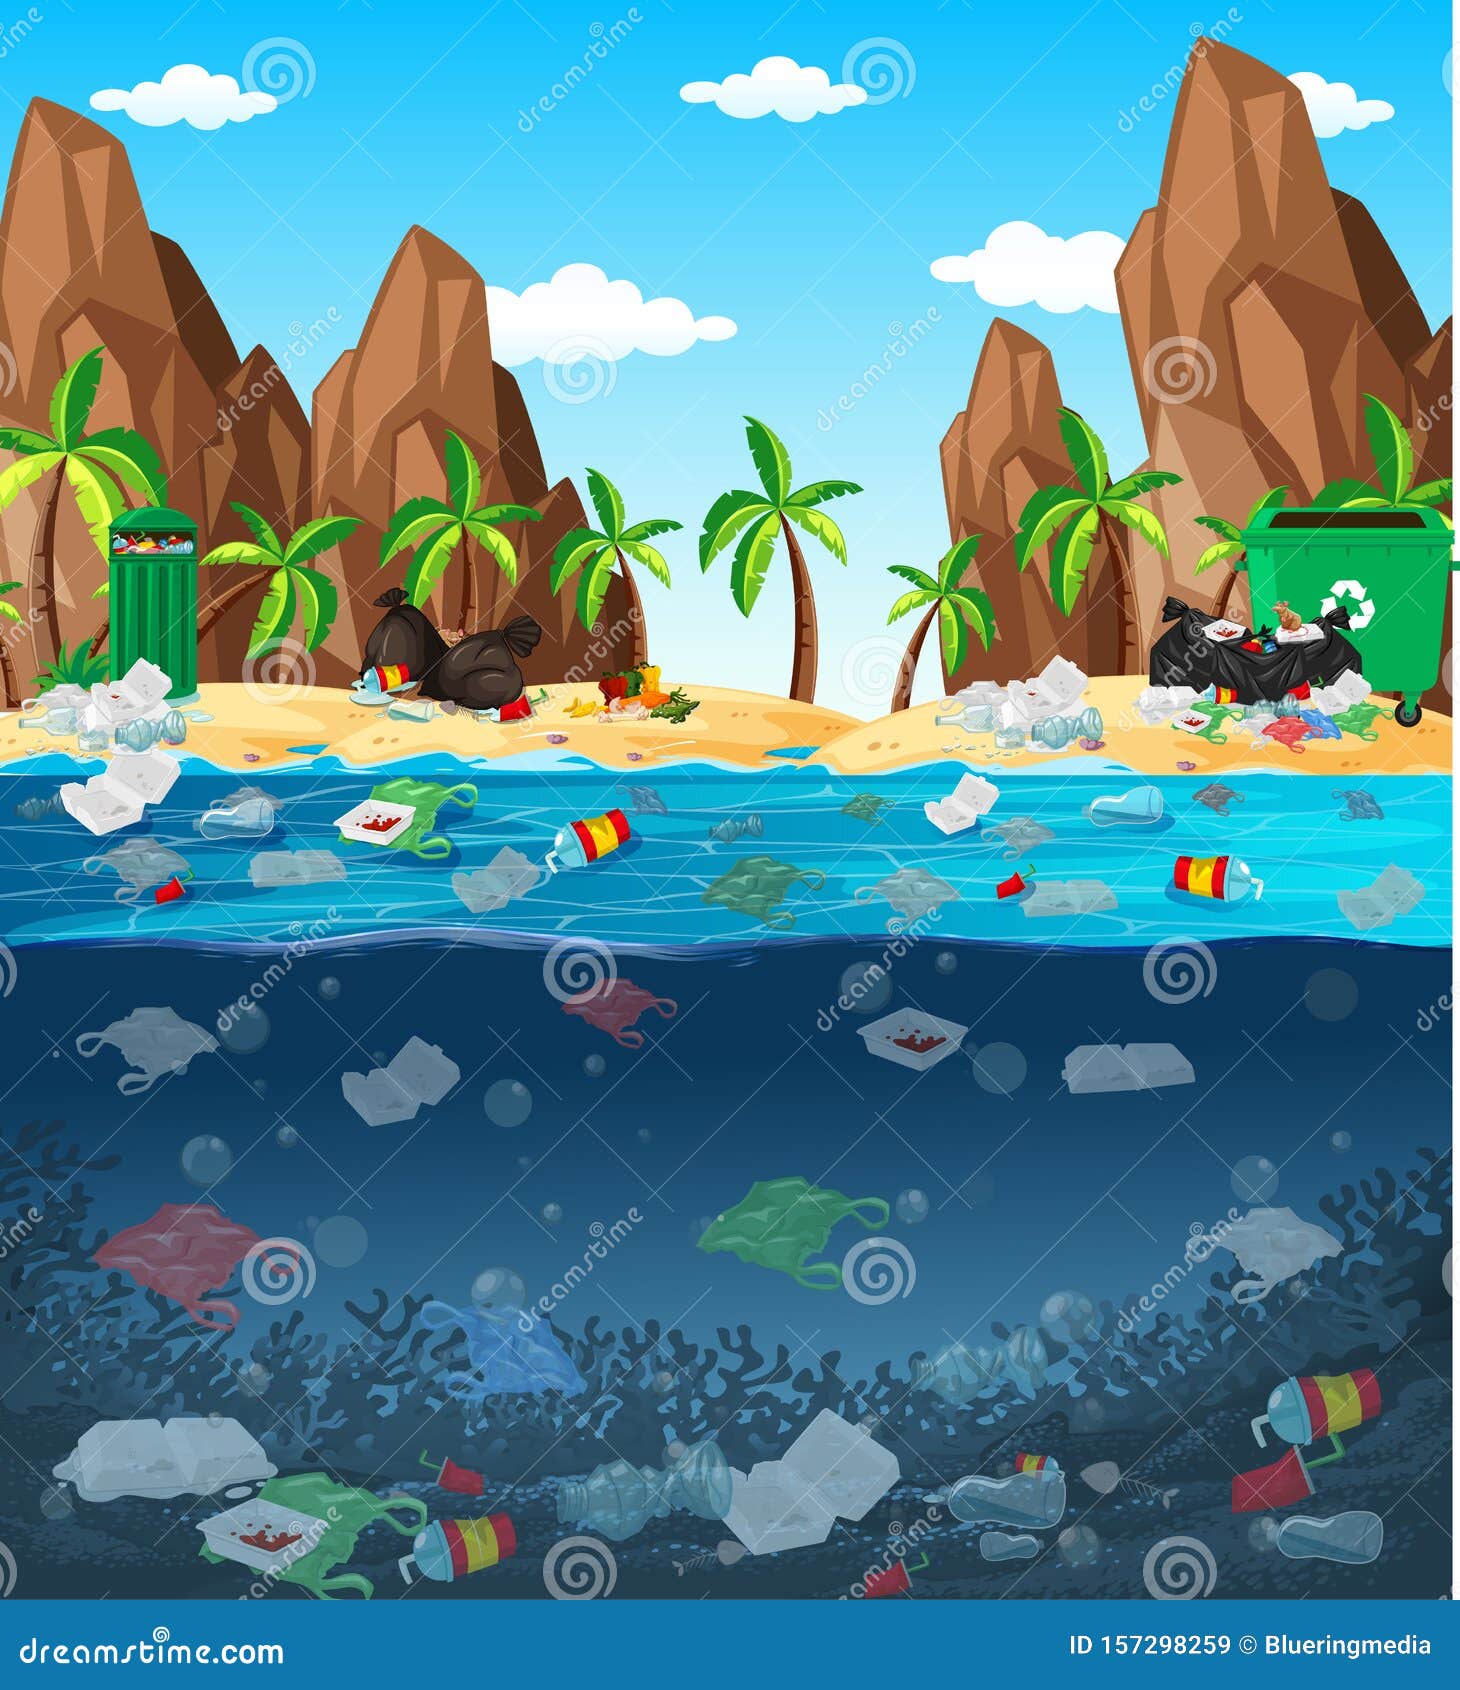 Water Pollution with Plastic Bags in Ocean Stock Vector - Illustration ...